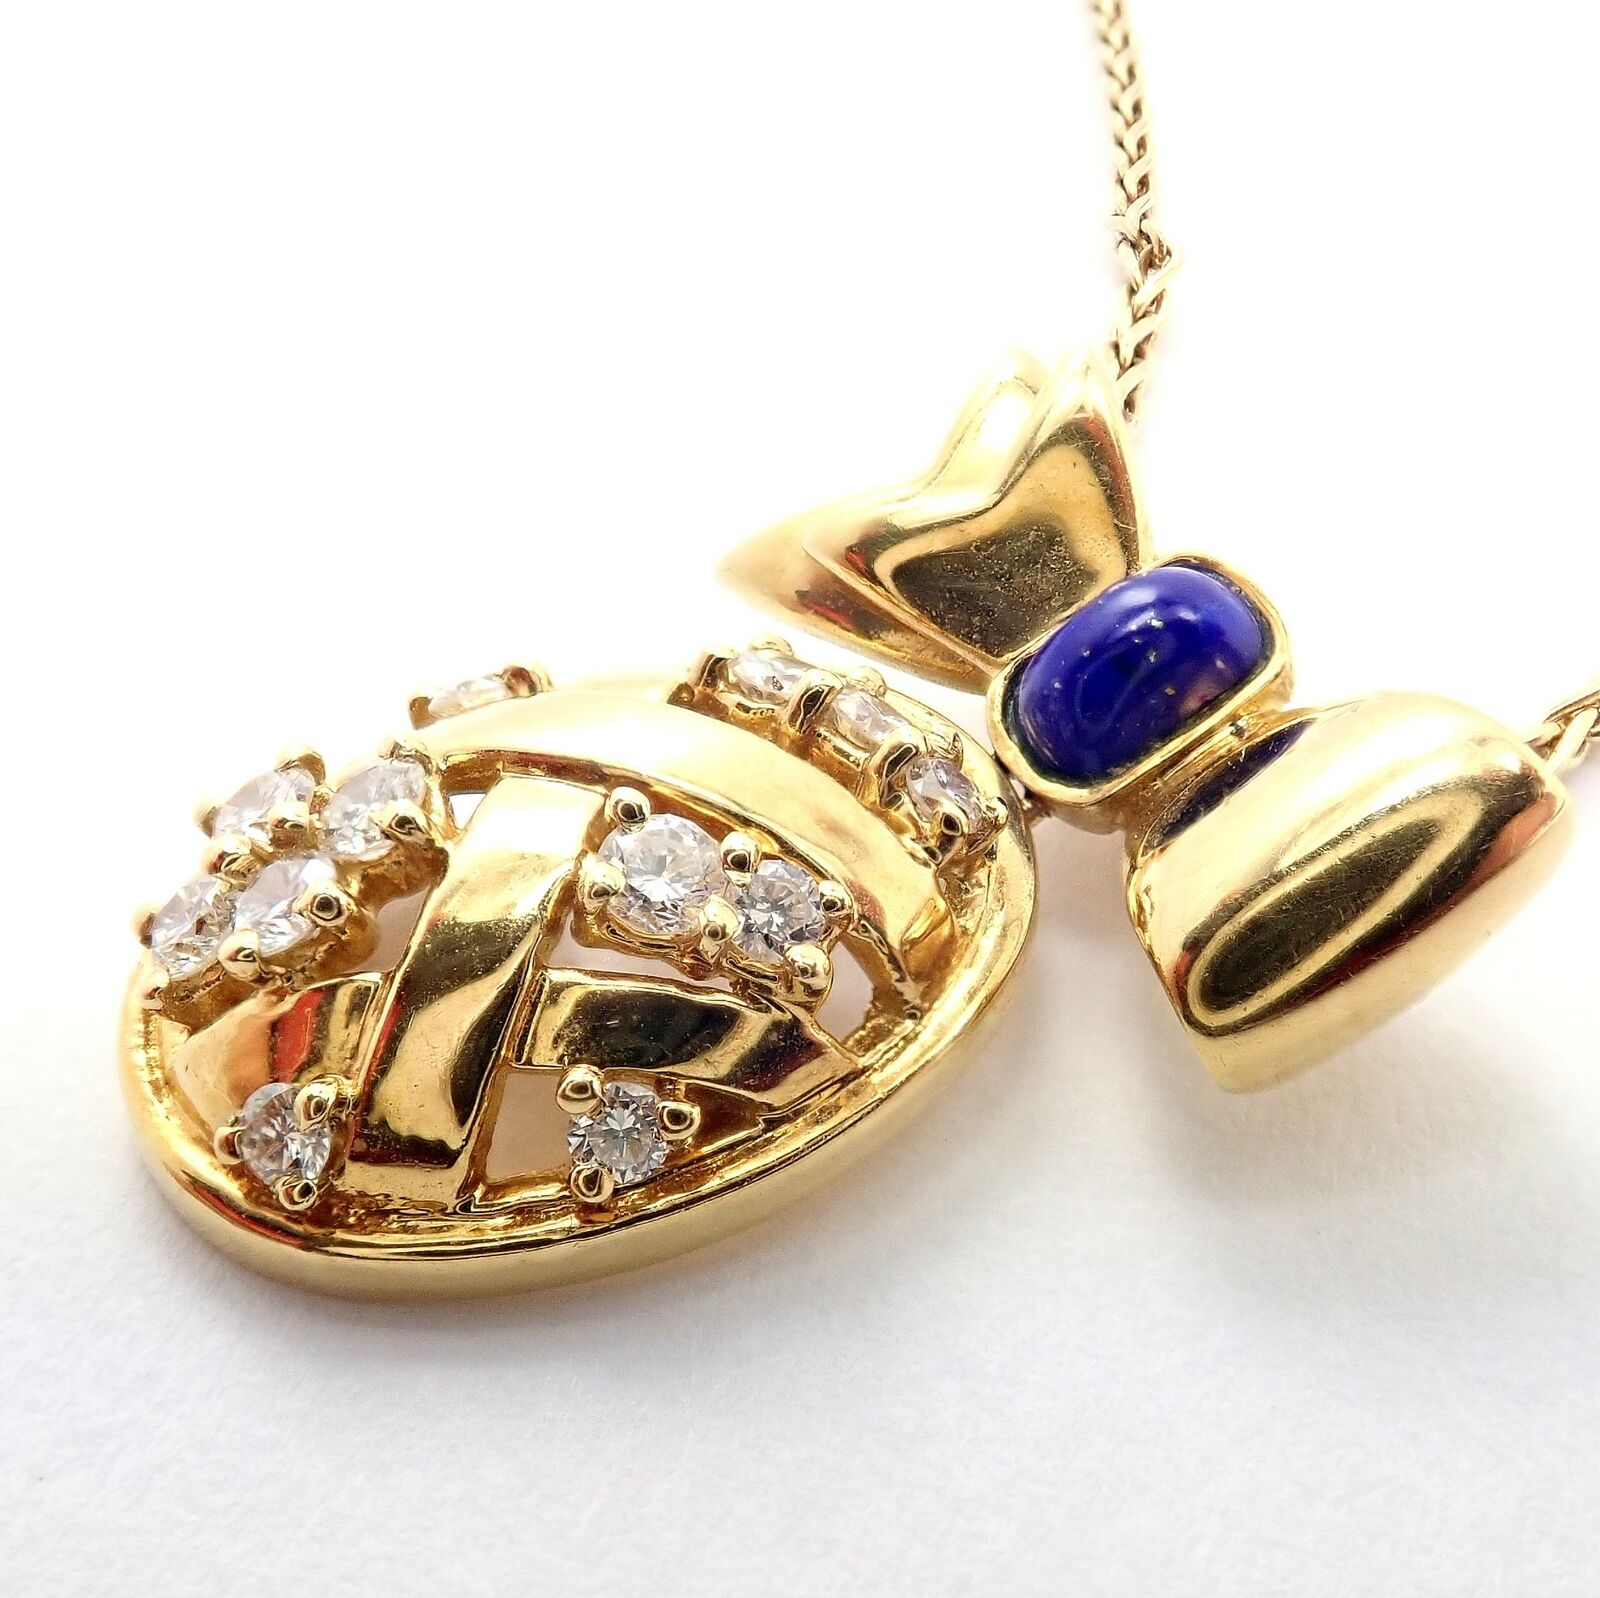 Christian Dior Jewelry & Watches:Fine Jewelry:Necklaces & Pendants Authentic! Christian Dior 18k Yellow Gold Lapis Diamond Egg Pendant Necklace